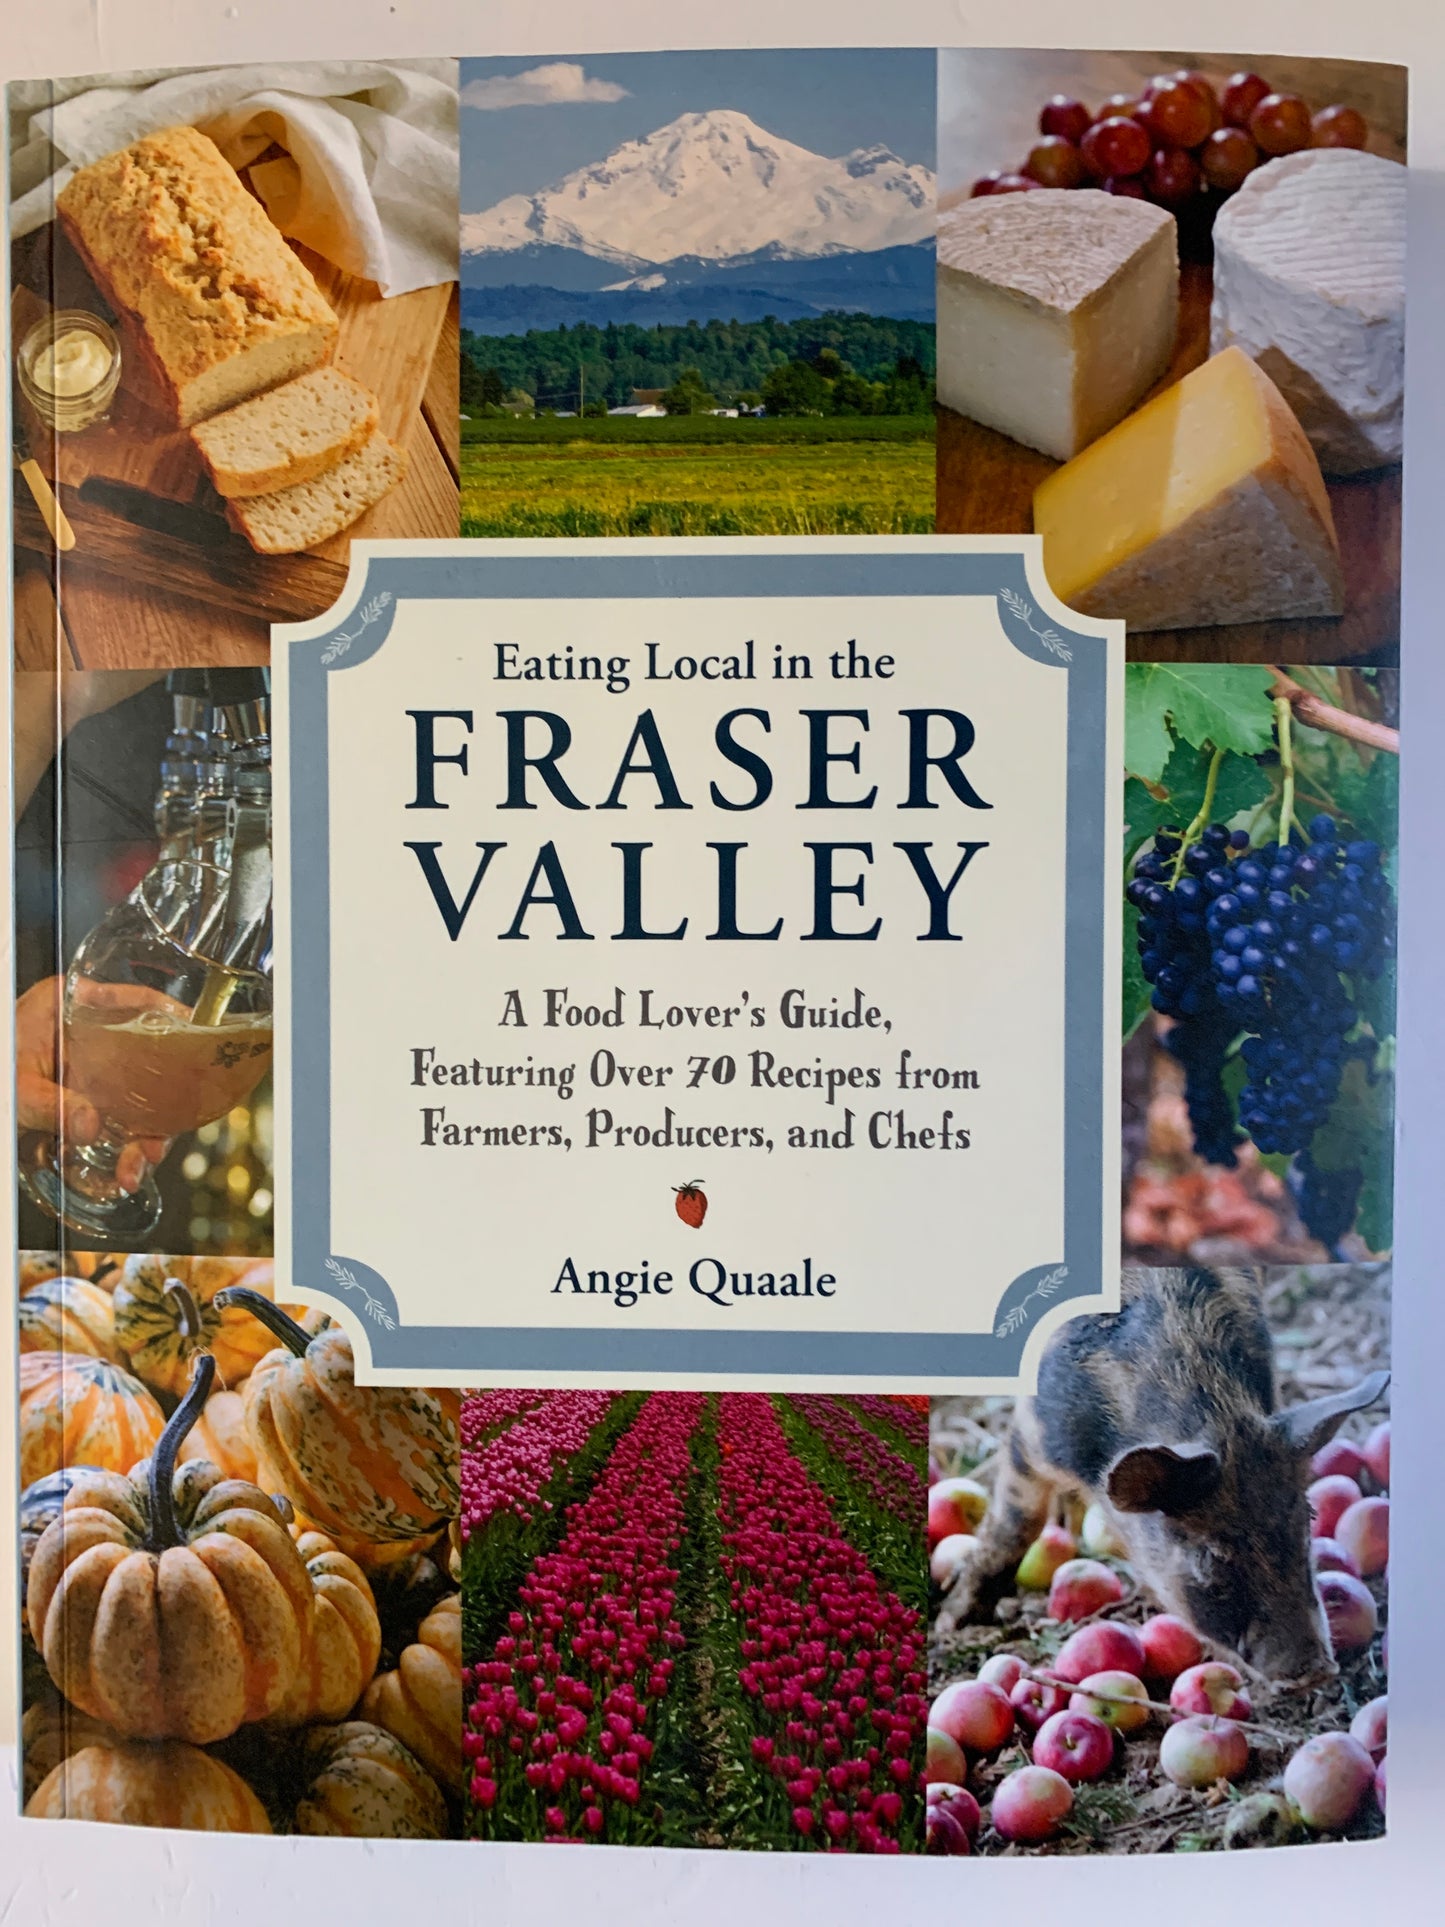 Eating Local in the Fraser Valley